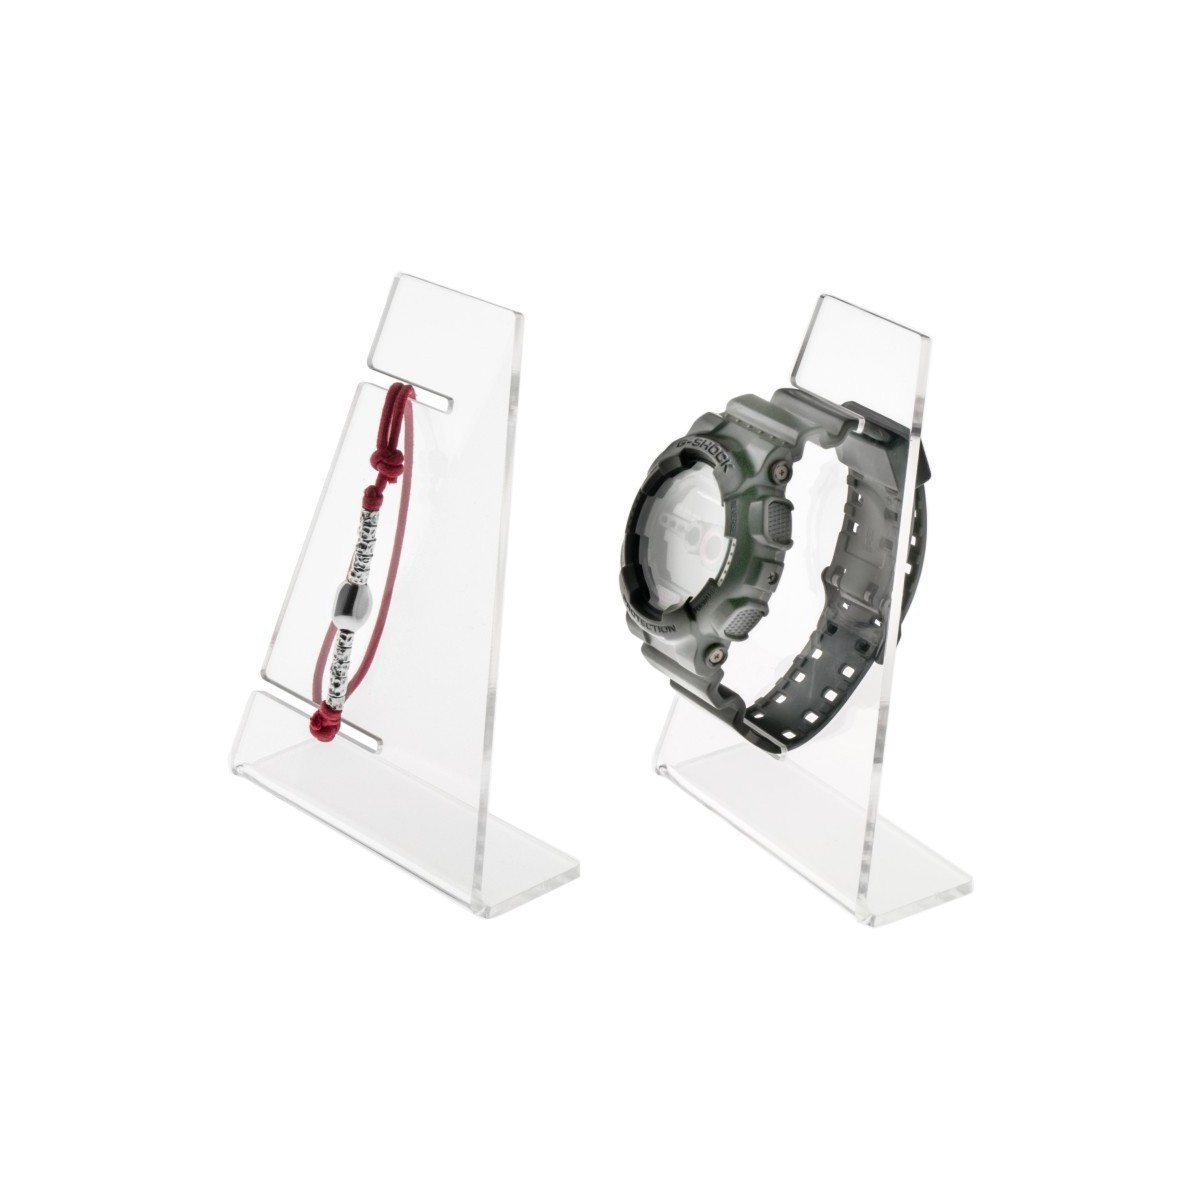 Clear Acrylic wrist watch display holder stand